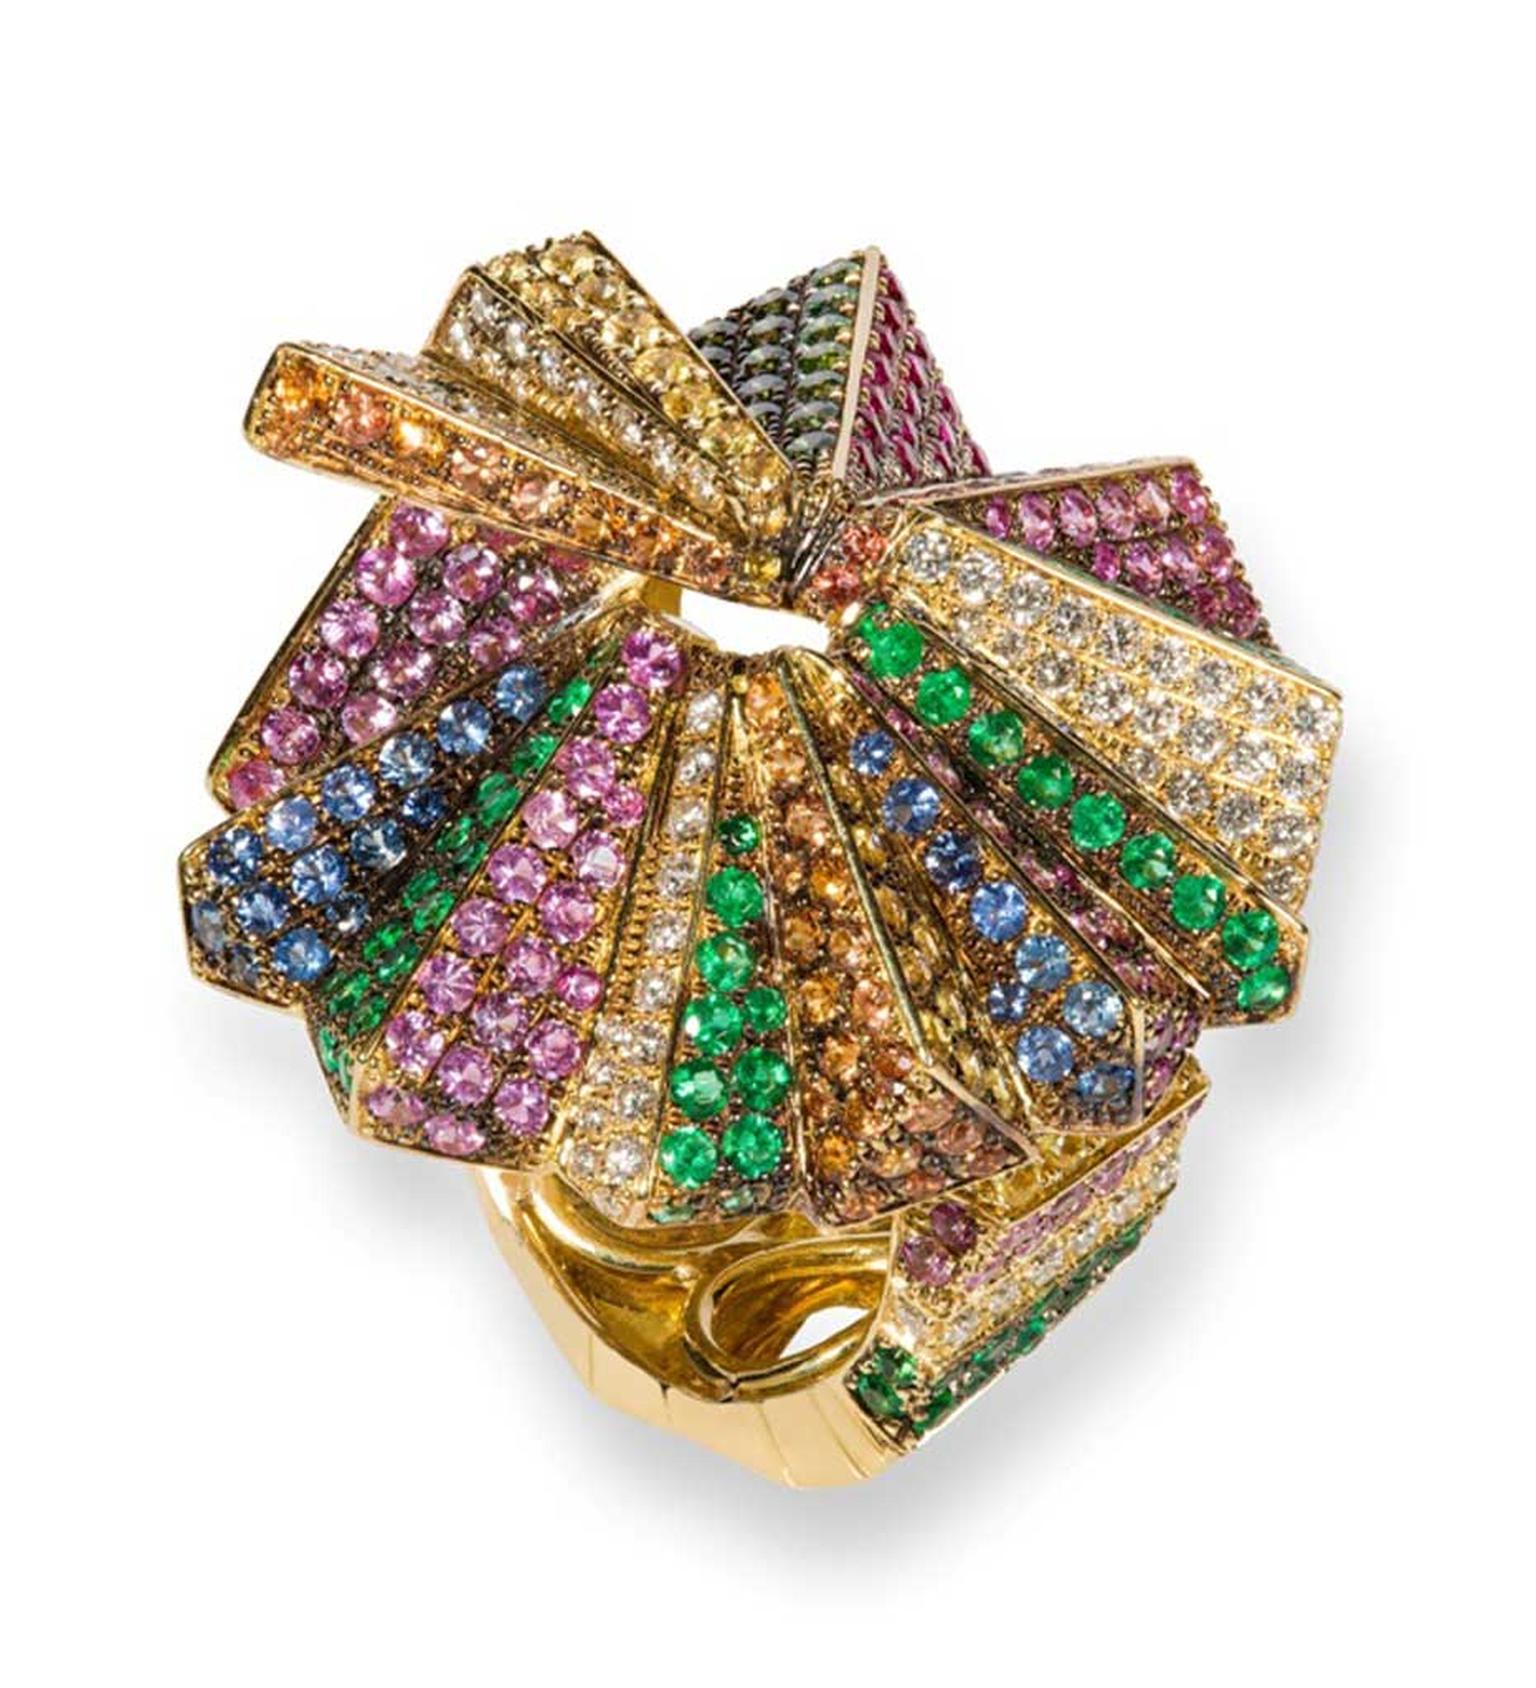 Rosior gold ring set with diamonds, rubies, sapphires and emeralds.